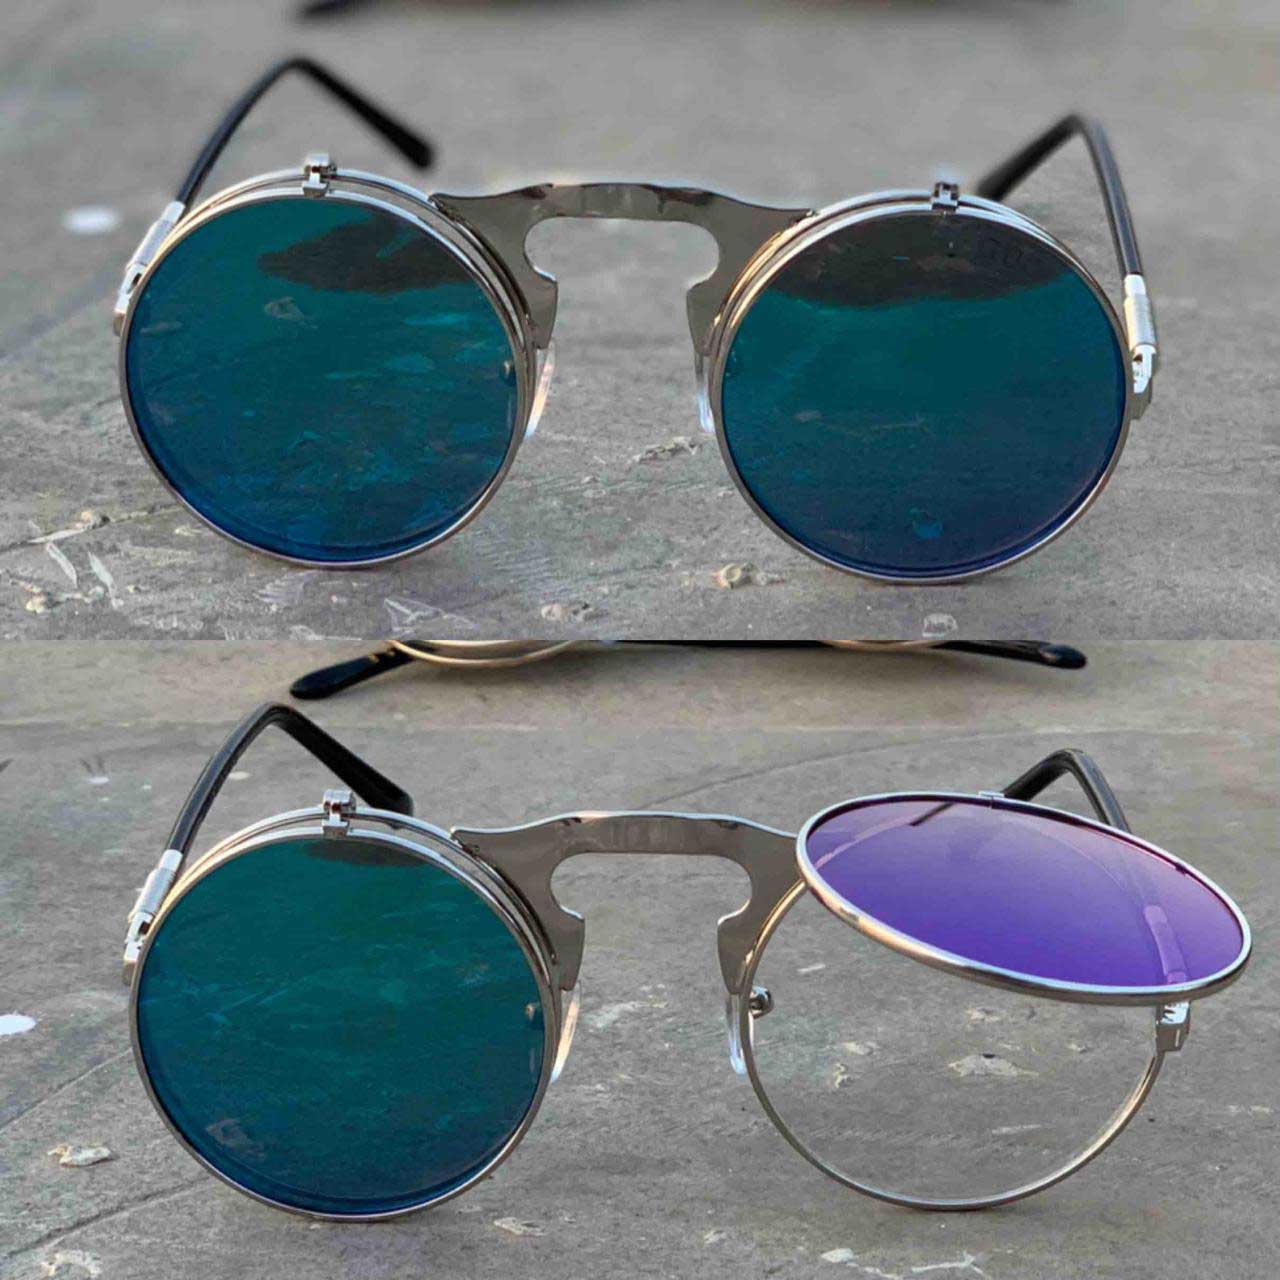 Stylish Round Metal Mirror Sunglasses For Men And Women-Unique and Classy